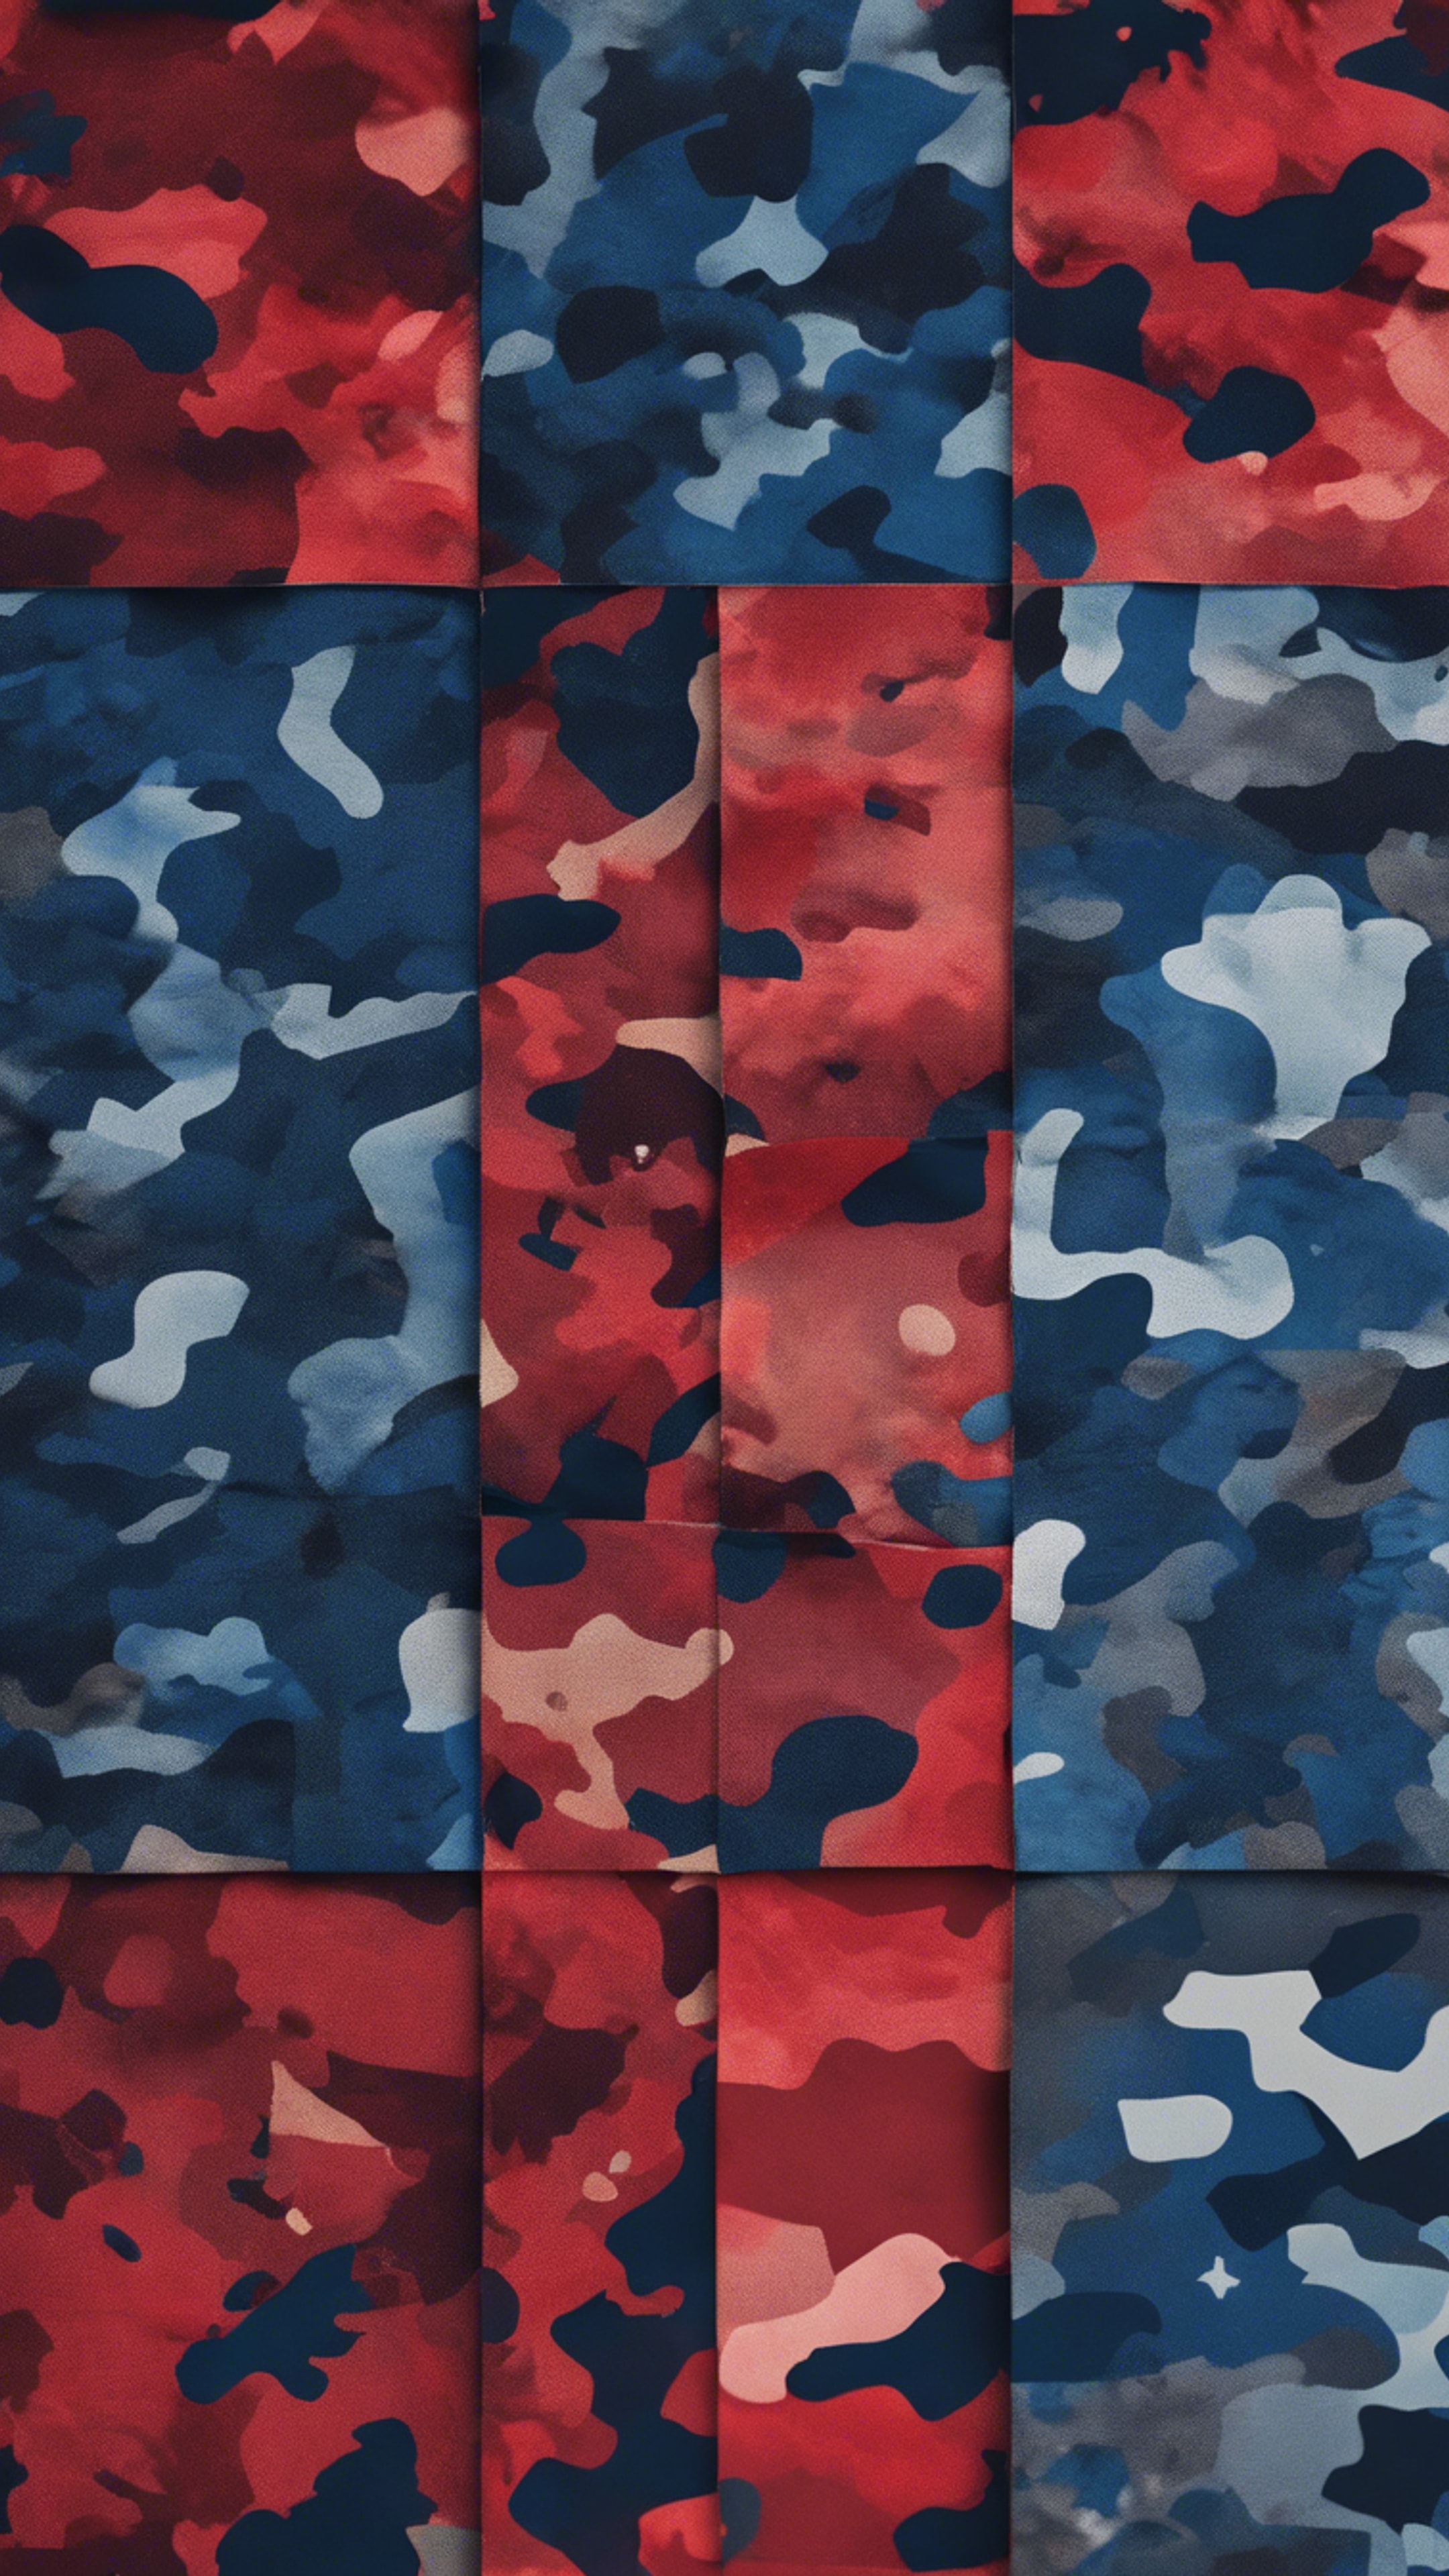 Wide patches of red and blue in a modernized camouflage pattern. Wallpaper[bf2d18a8e46c447ea6e3]